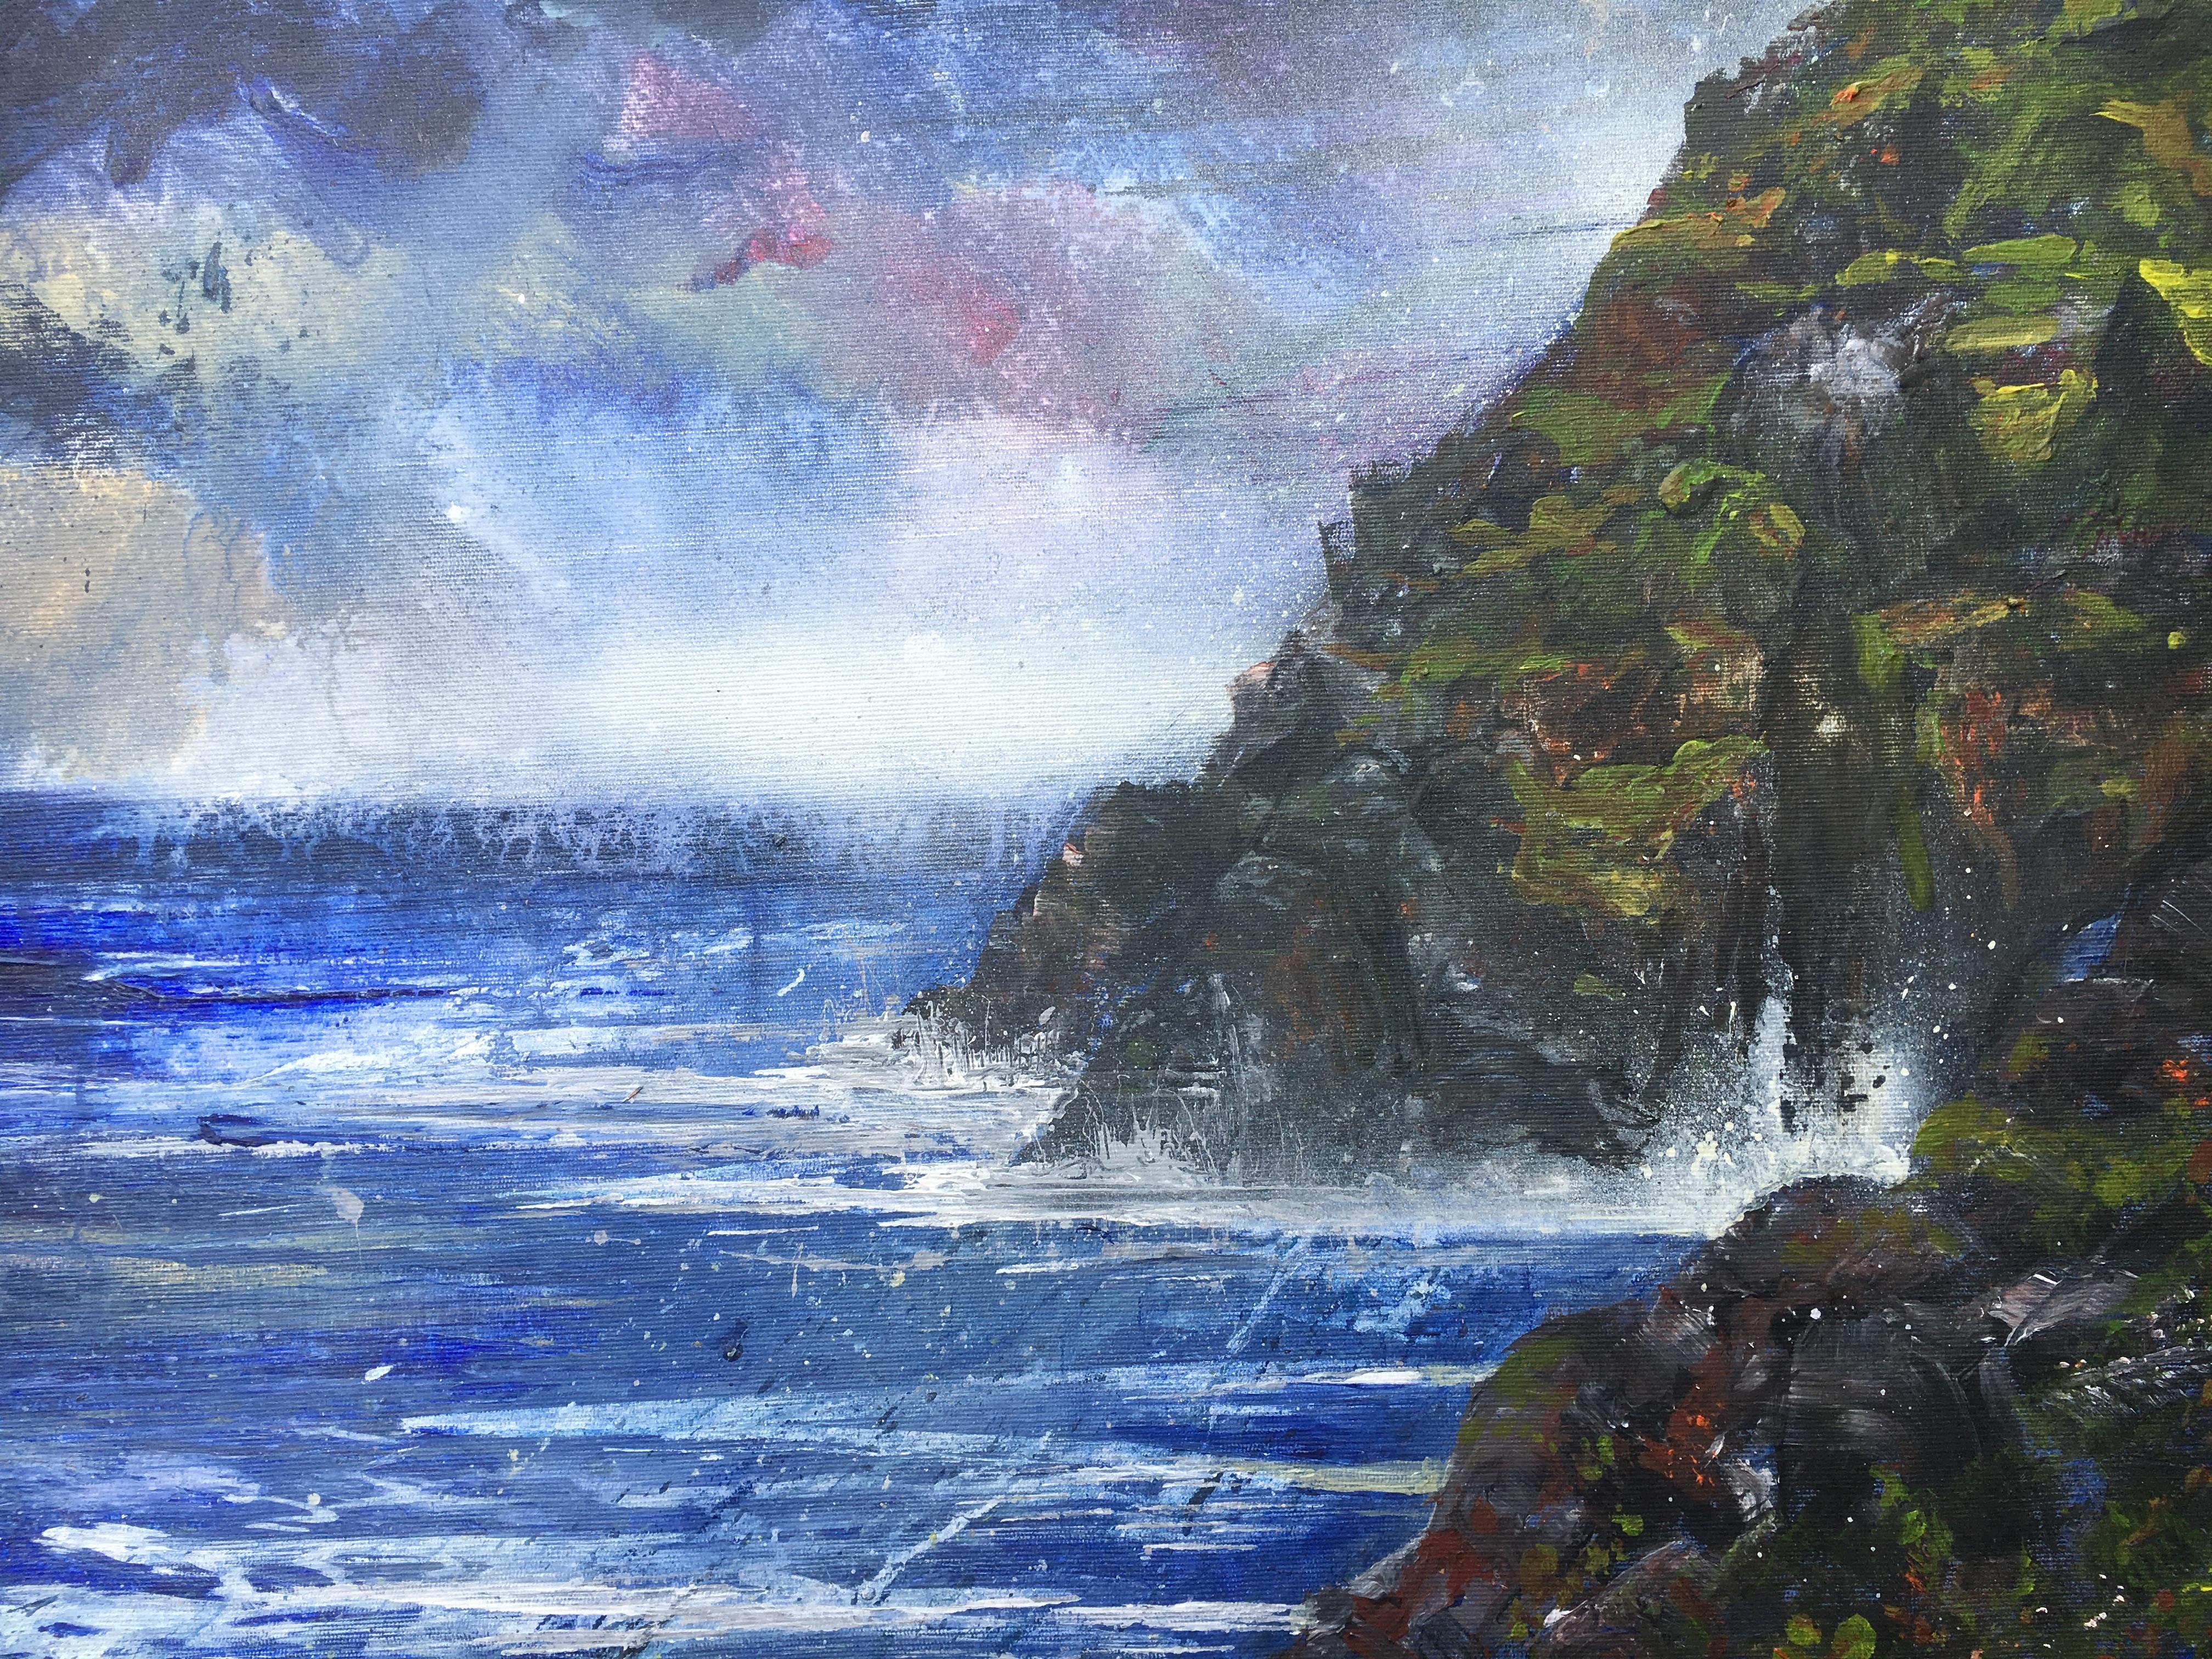 Botallack Cliffs - Acrylic painting on canvas  - Painting by Ben Dennett